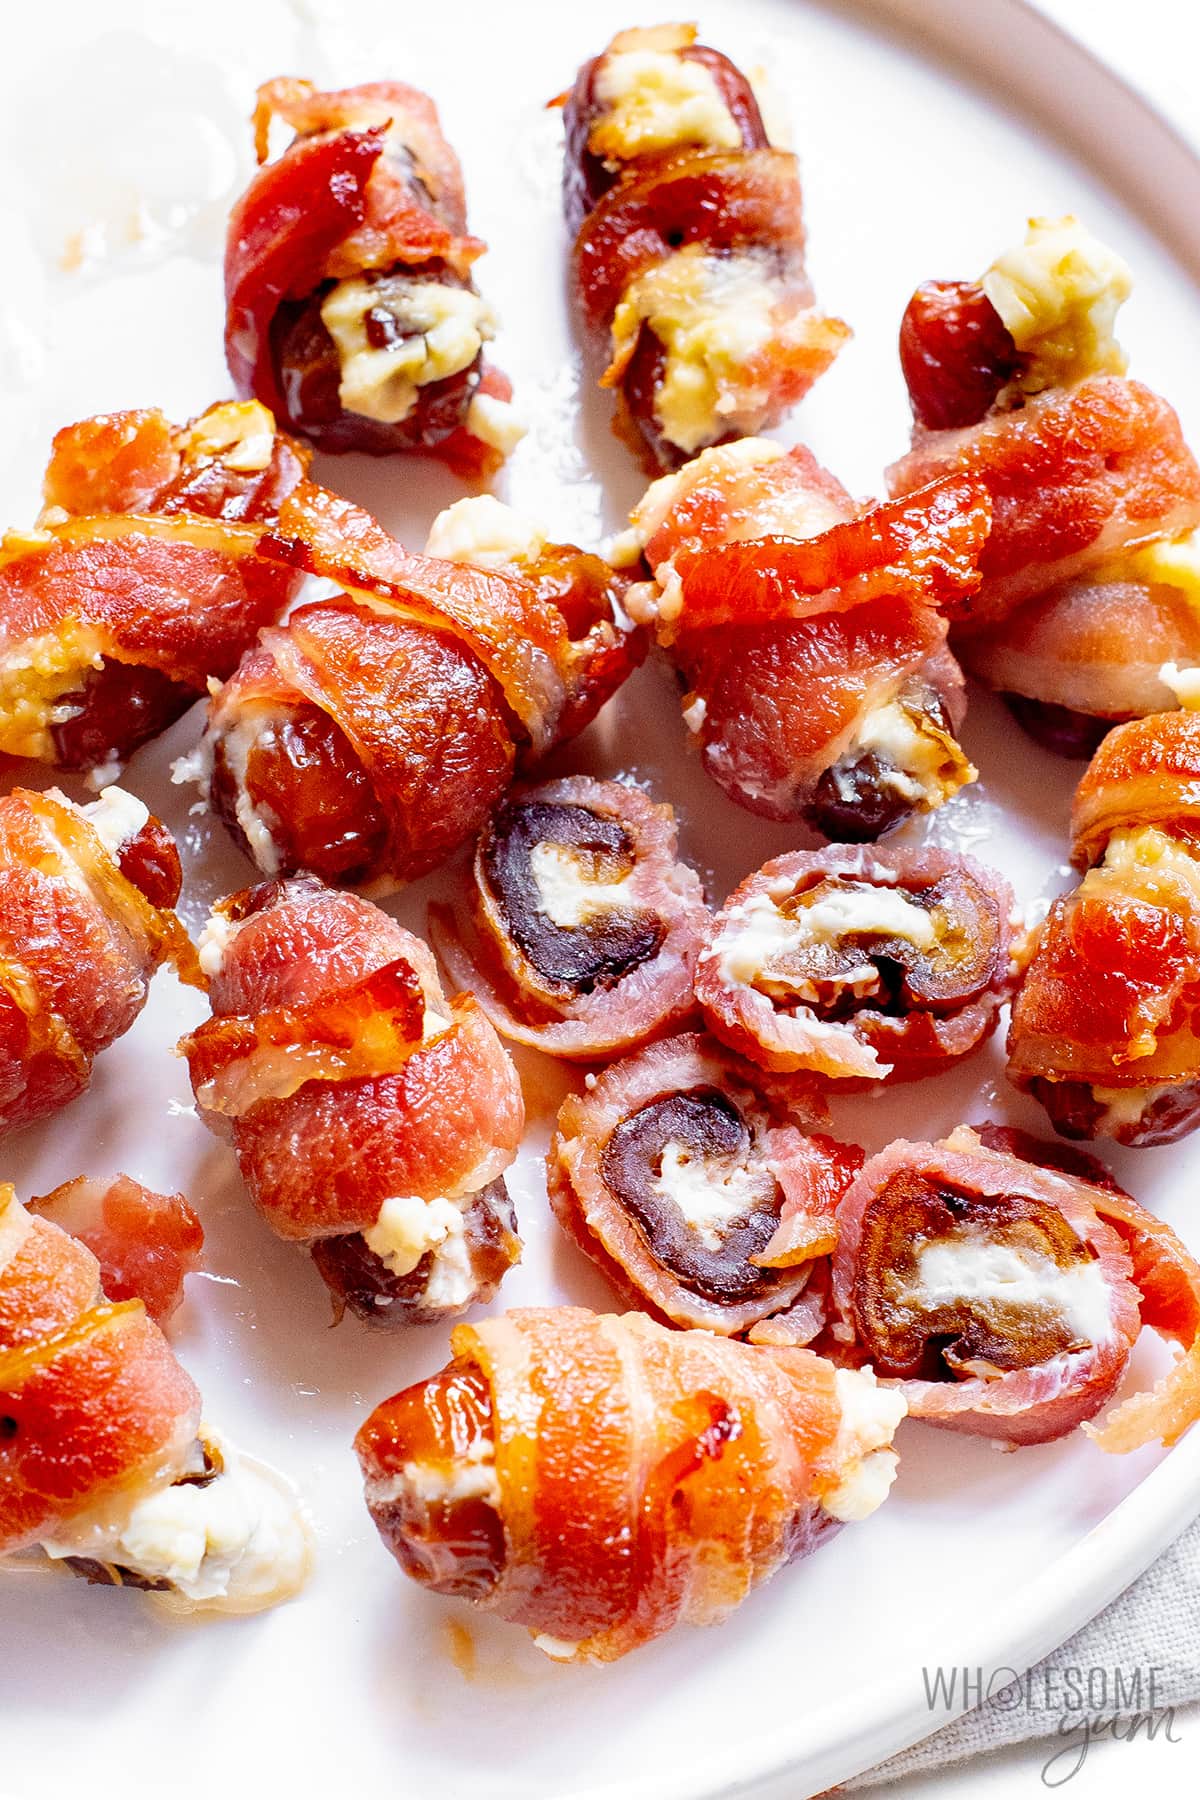 Bacon wrapped stuffed dates on a plate, with 2 cut open.